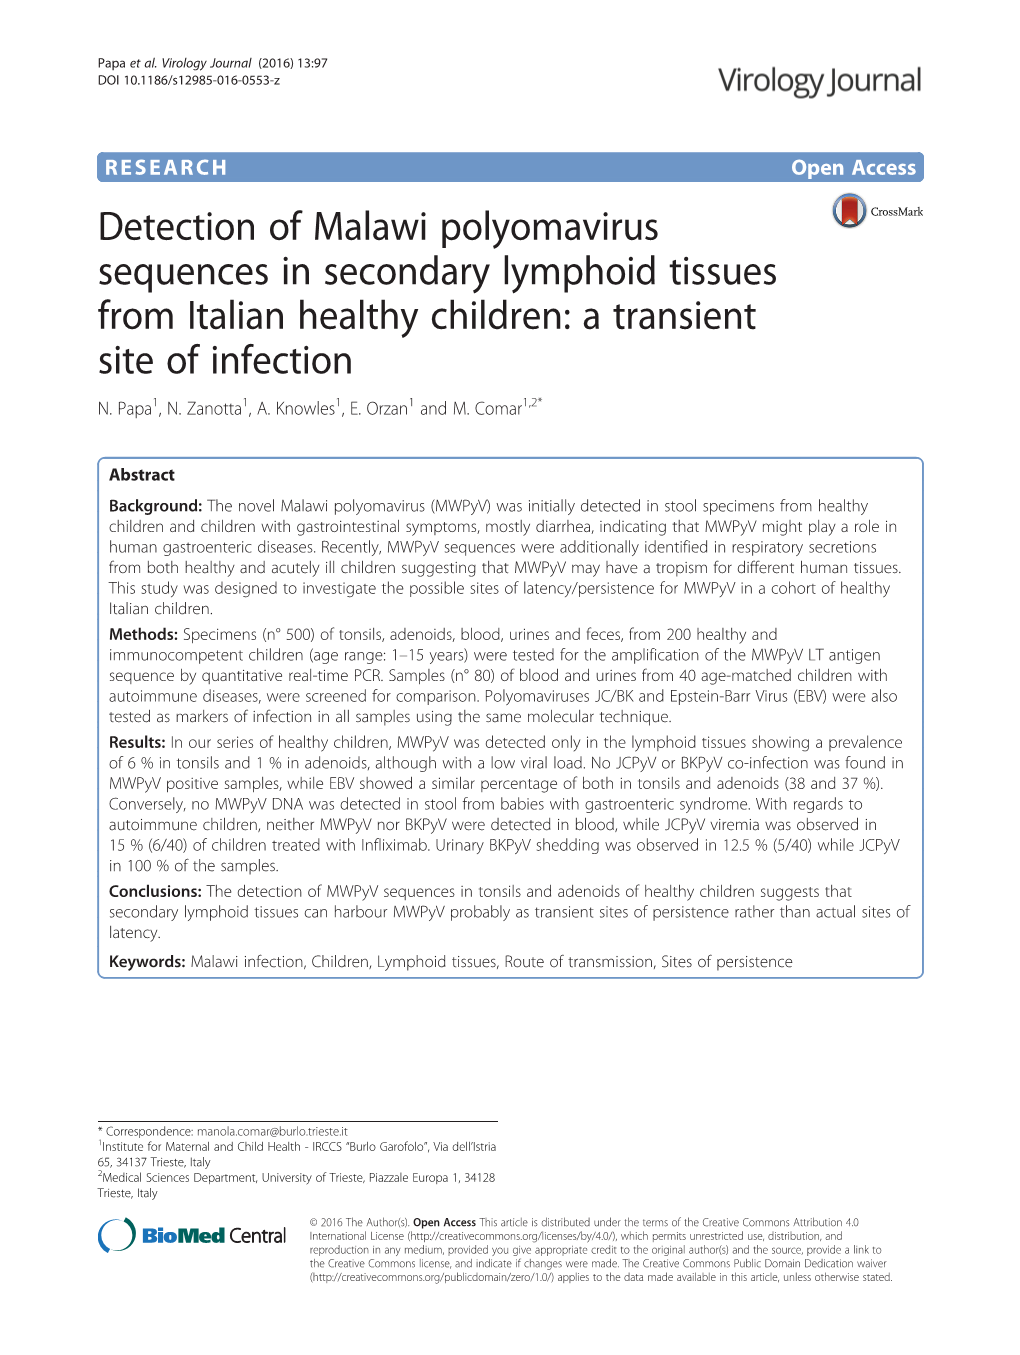 Detection of Malawi Polyomavirus Sequences in Secondary Lymphoid Tissues from Italian Healthy Children: a Transient Site of Infection N